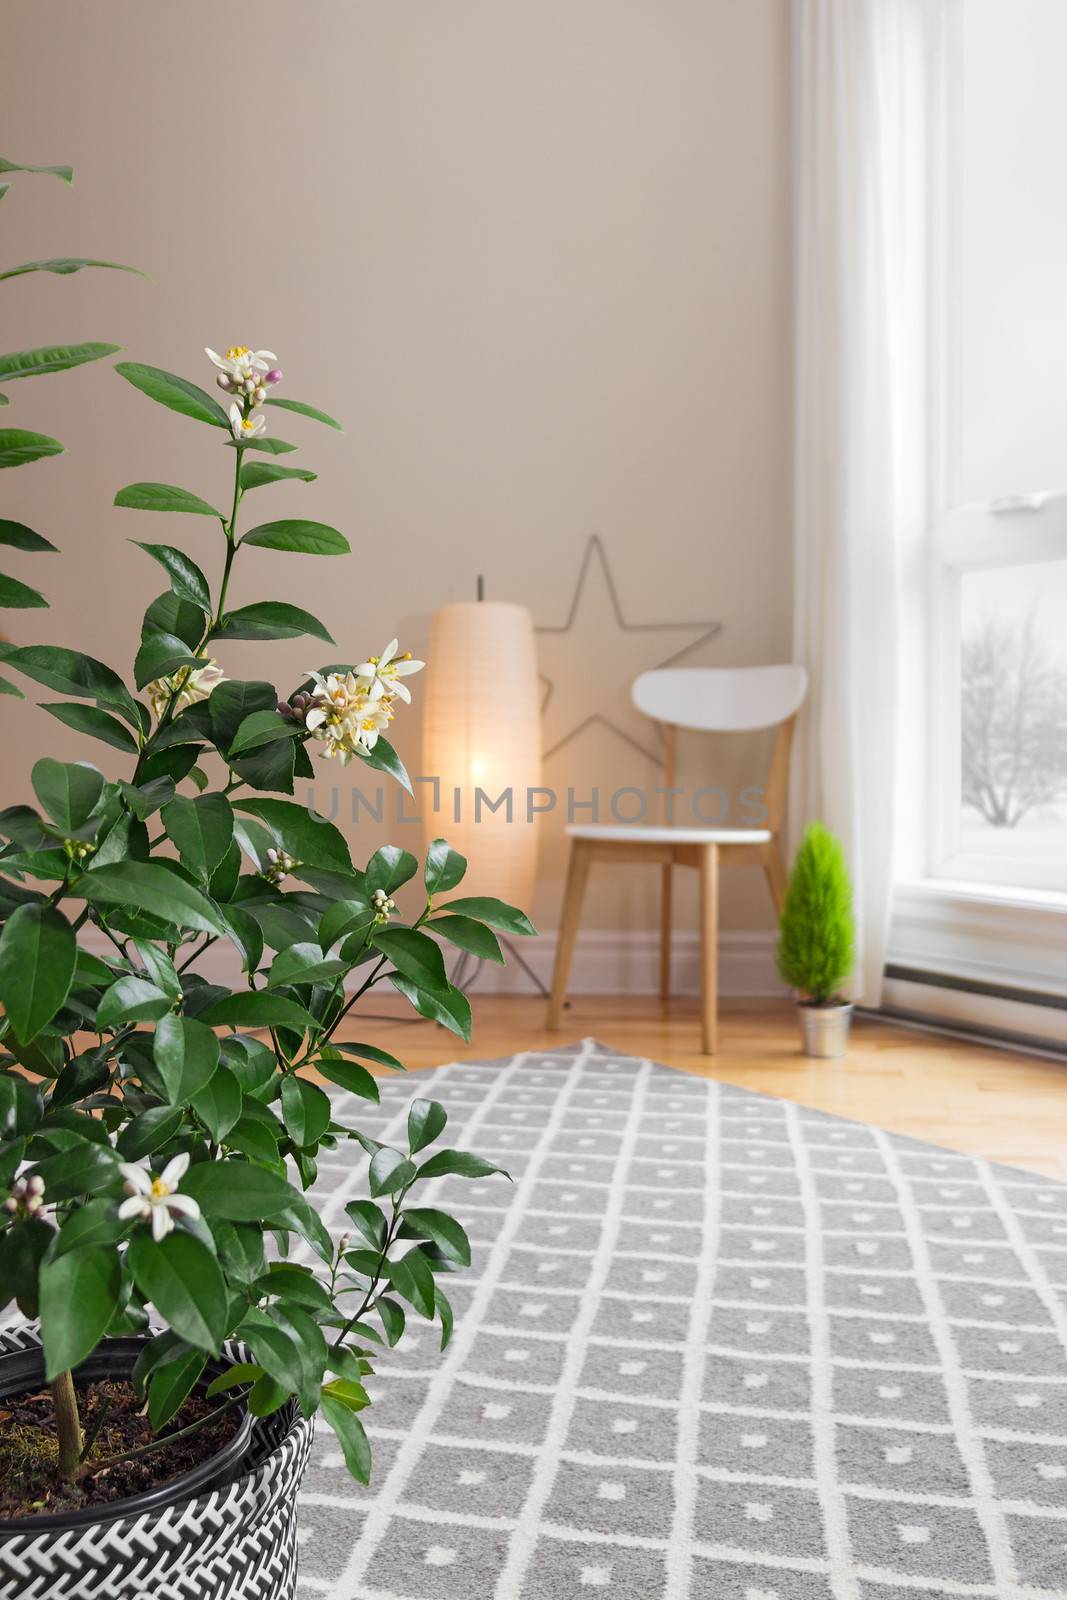 Blooming lemon tree in a spacious living room with modern decor.